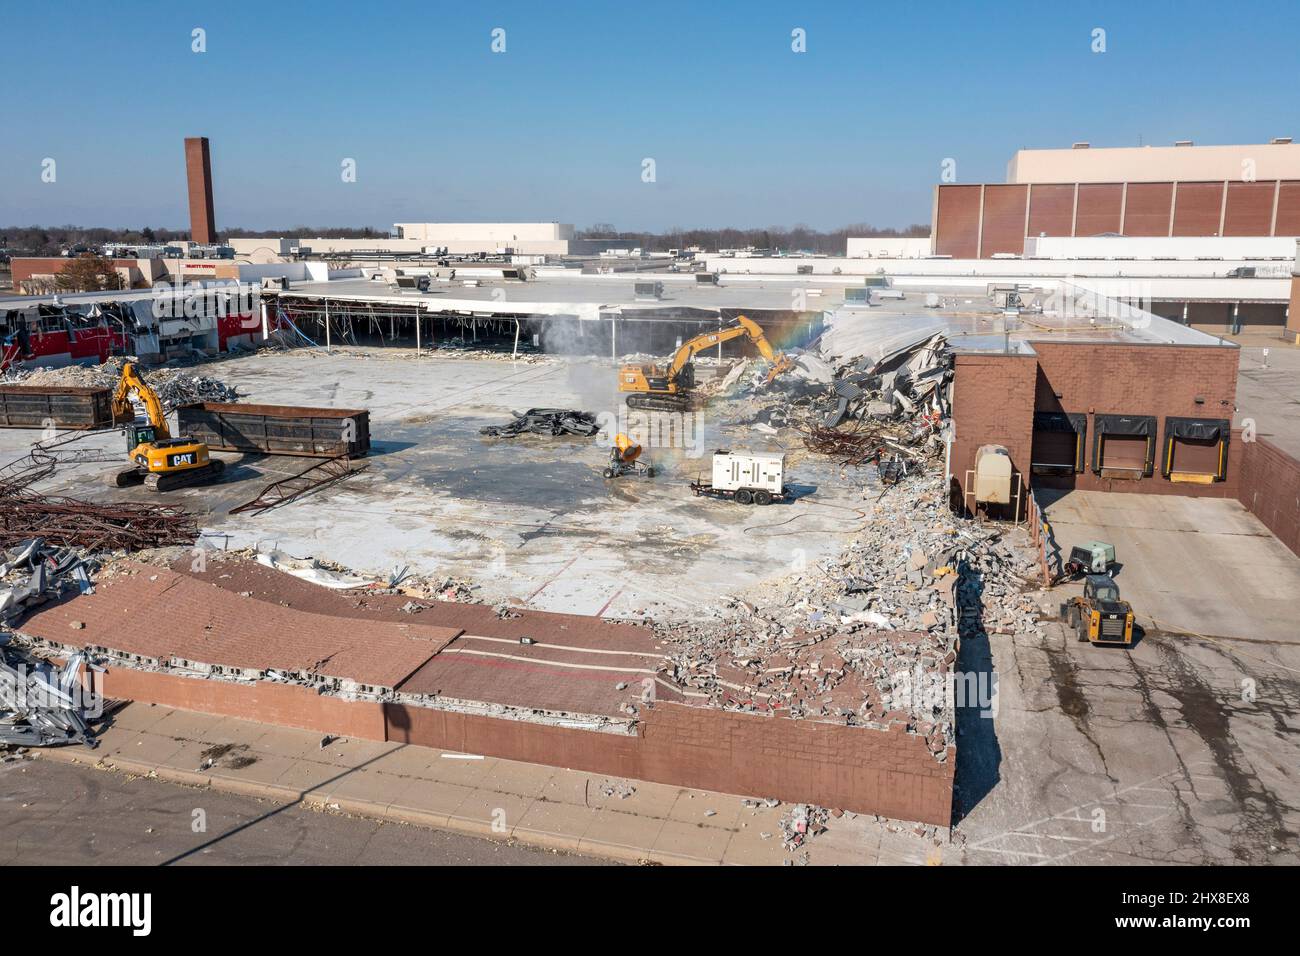 Harper Woods, Michigan - Demolition of the Eastland Center, one of the Detroit area's oldest enclosed shopping malls. The Target store (foreground) is Stock Photo